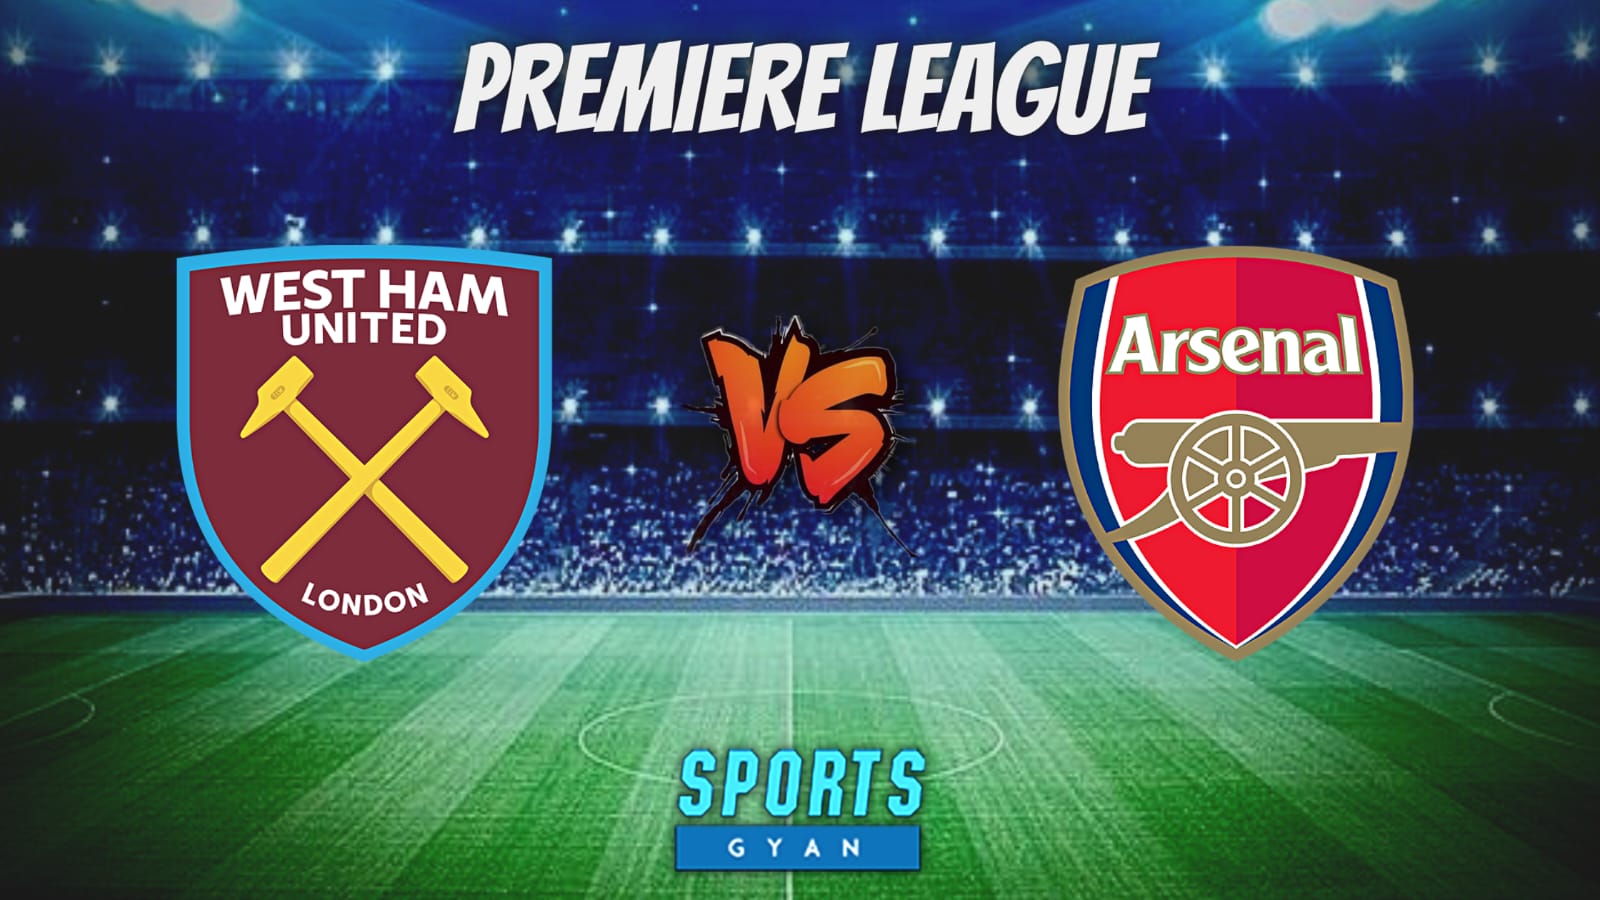 WHU vs ARS Dream11 Prediction, Player stats, Pitch Report, Injury updates & Dream11 Team for Today Match.